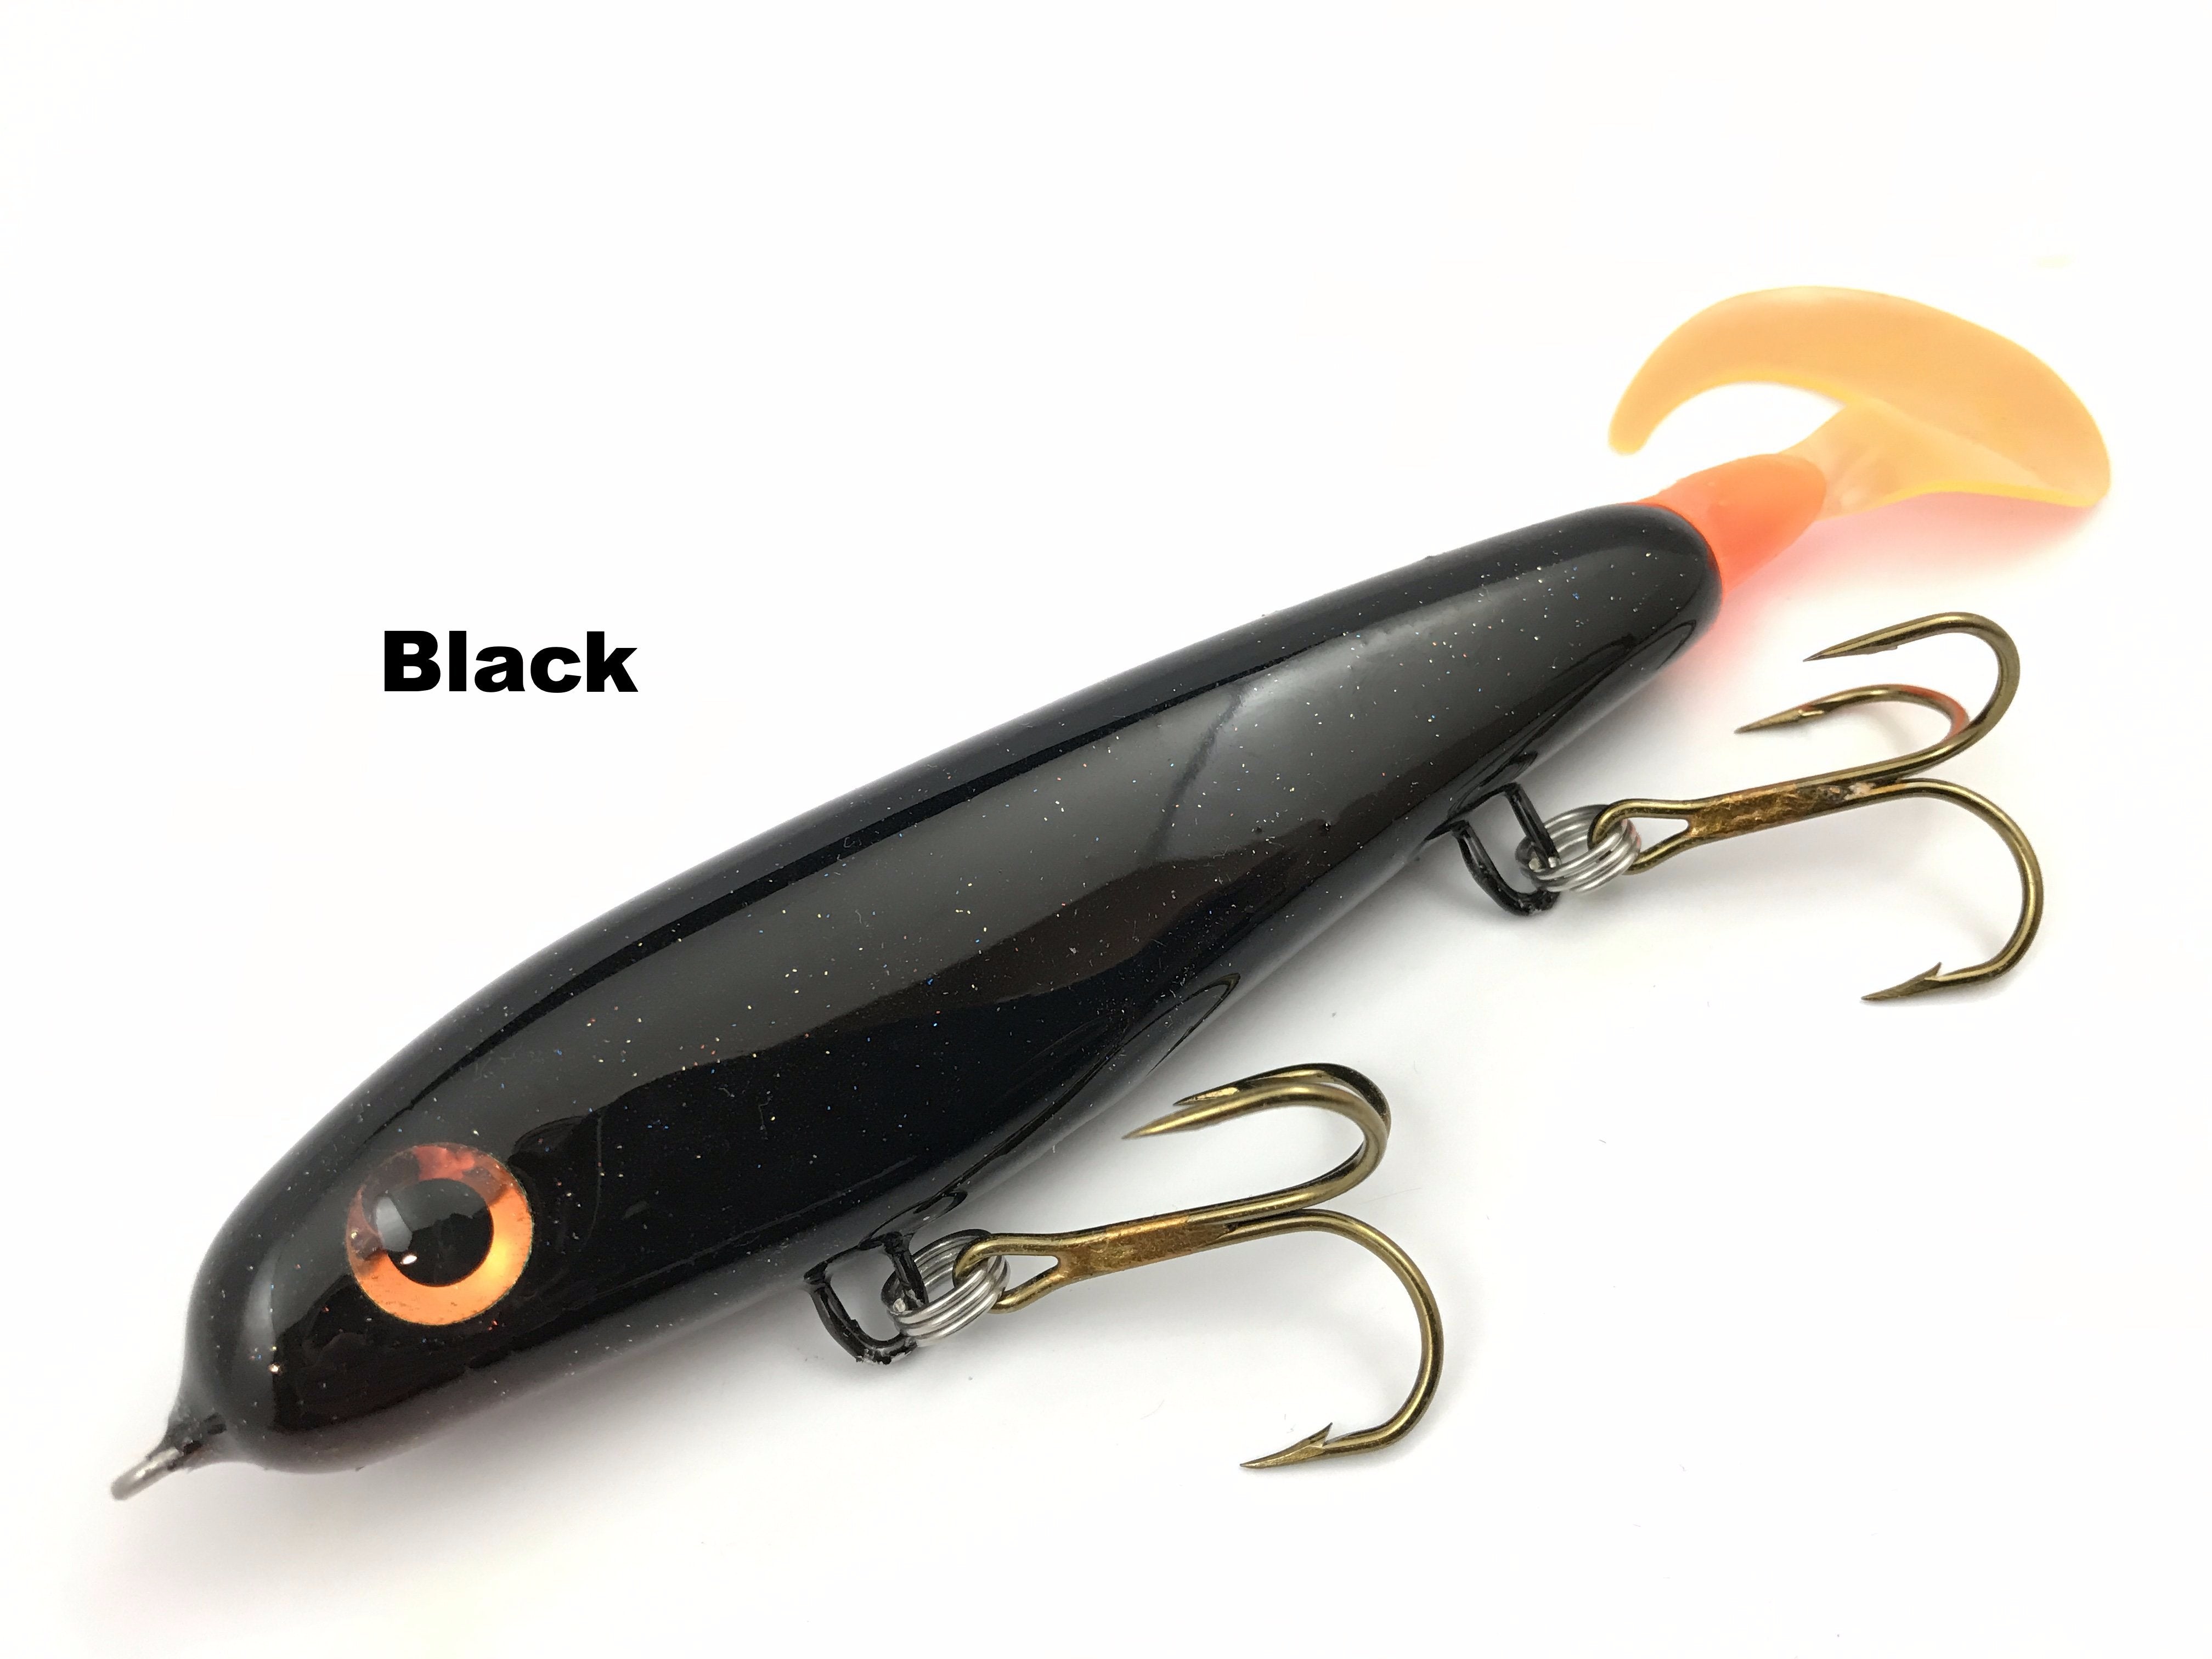  RONZ Lures 8 Replacement Tails 6ct Black Pearl : Sports &  Outdoors